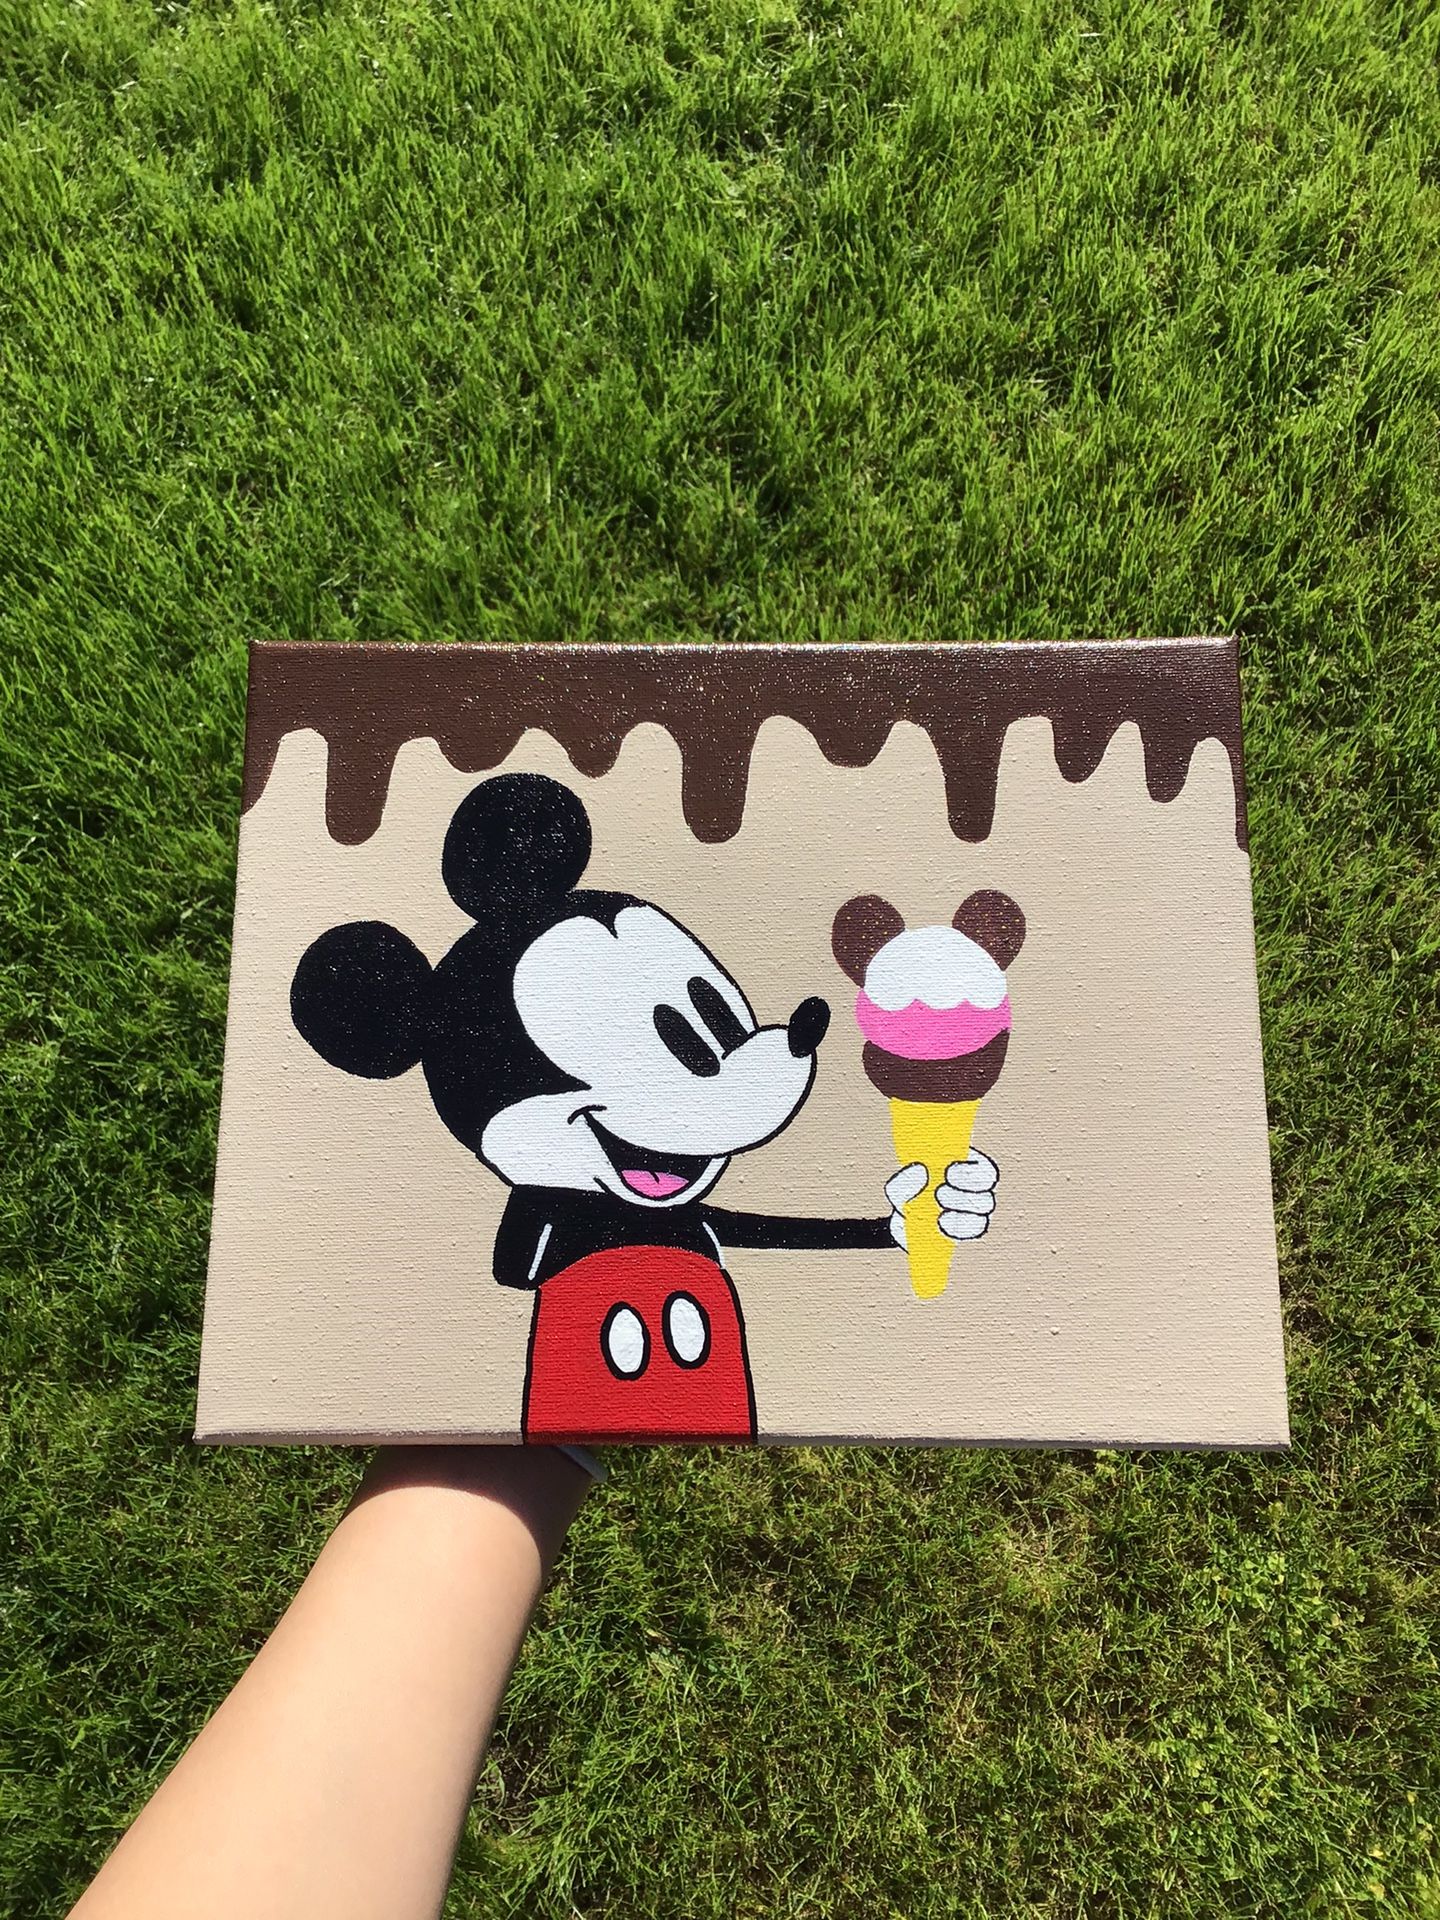 Mickey Mouse Painting Room Home Decor Wall Art Frame Acrylic Canvas Artwork Handmade Hand Painted Disney Mickey Minnie Mouse Disneyland Collectibles 